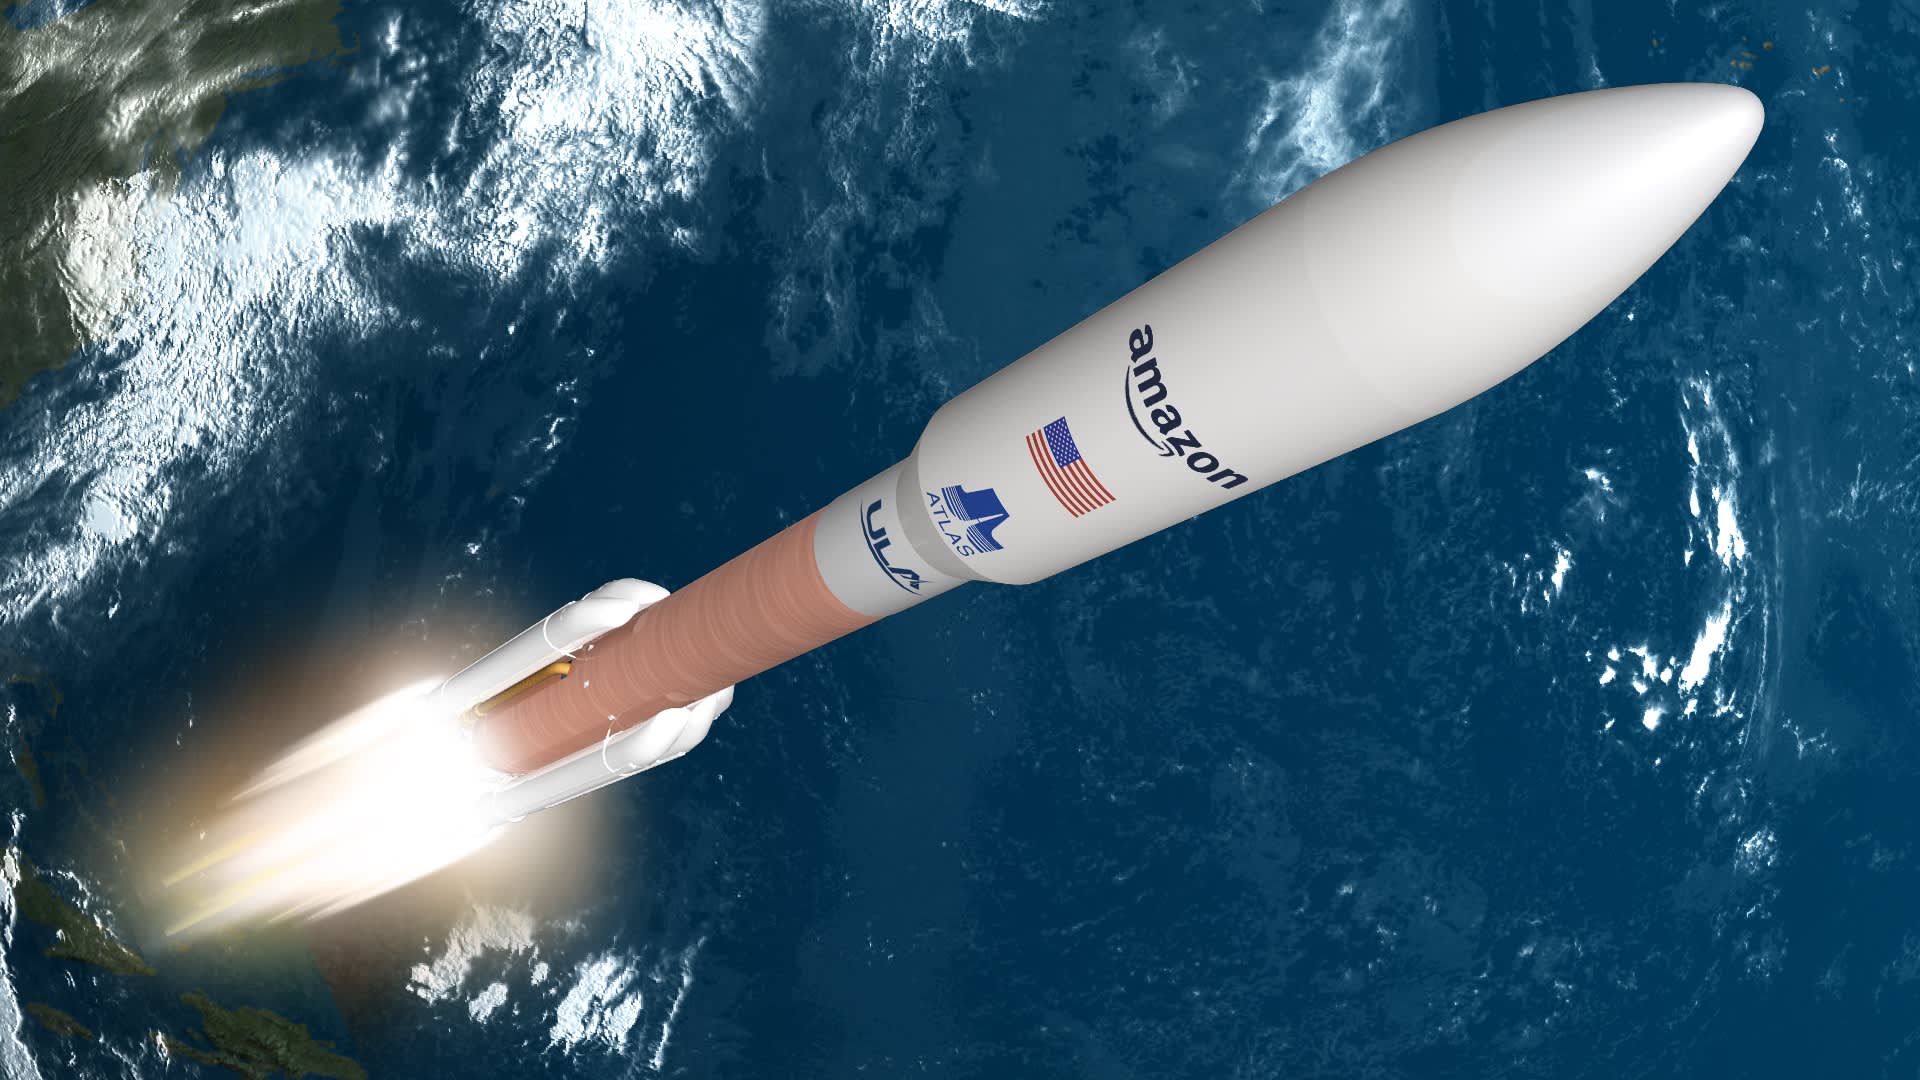 Amazon takes on SpaceX in the satellite internet with Project Kuiper